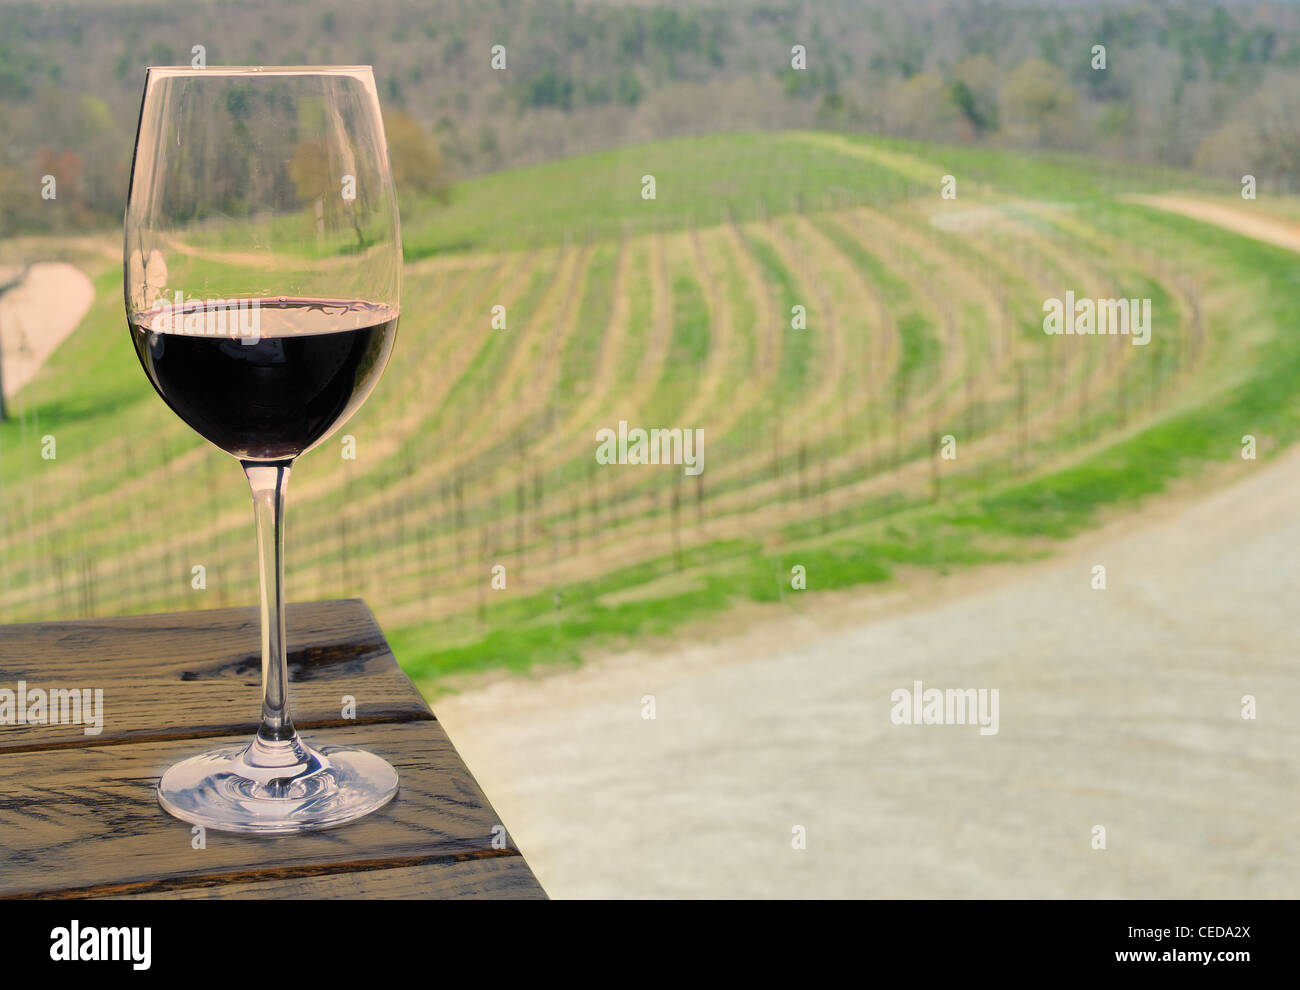 A vineyard and a glass of wine. Stock Photo